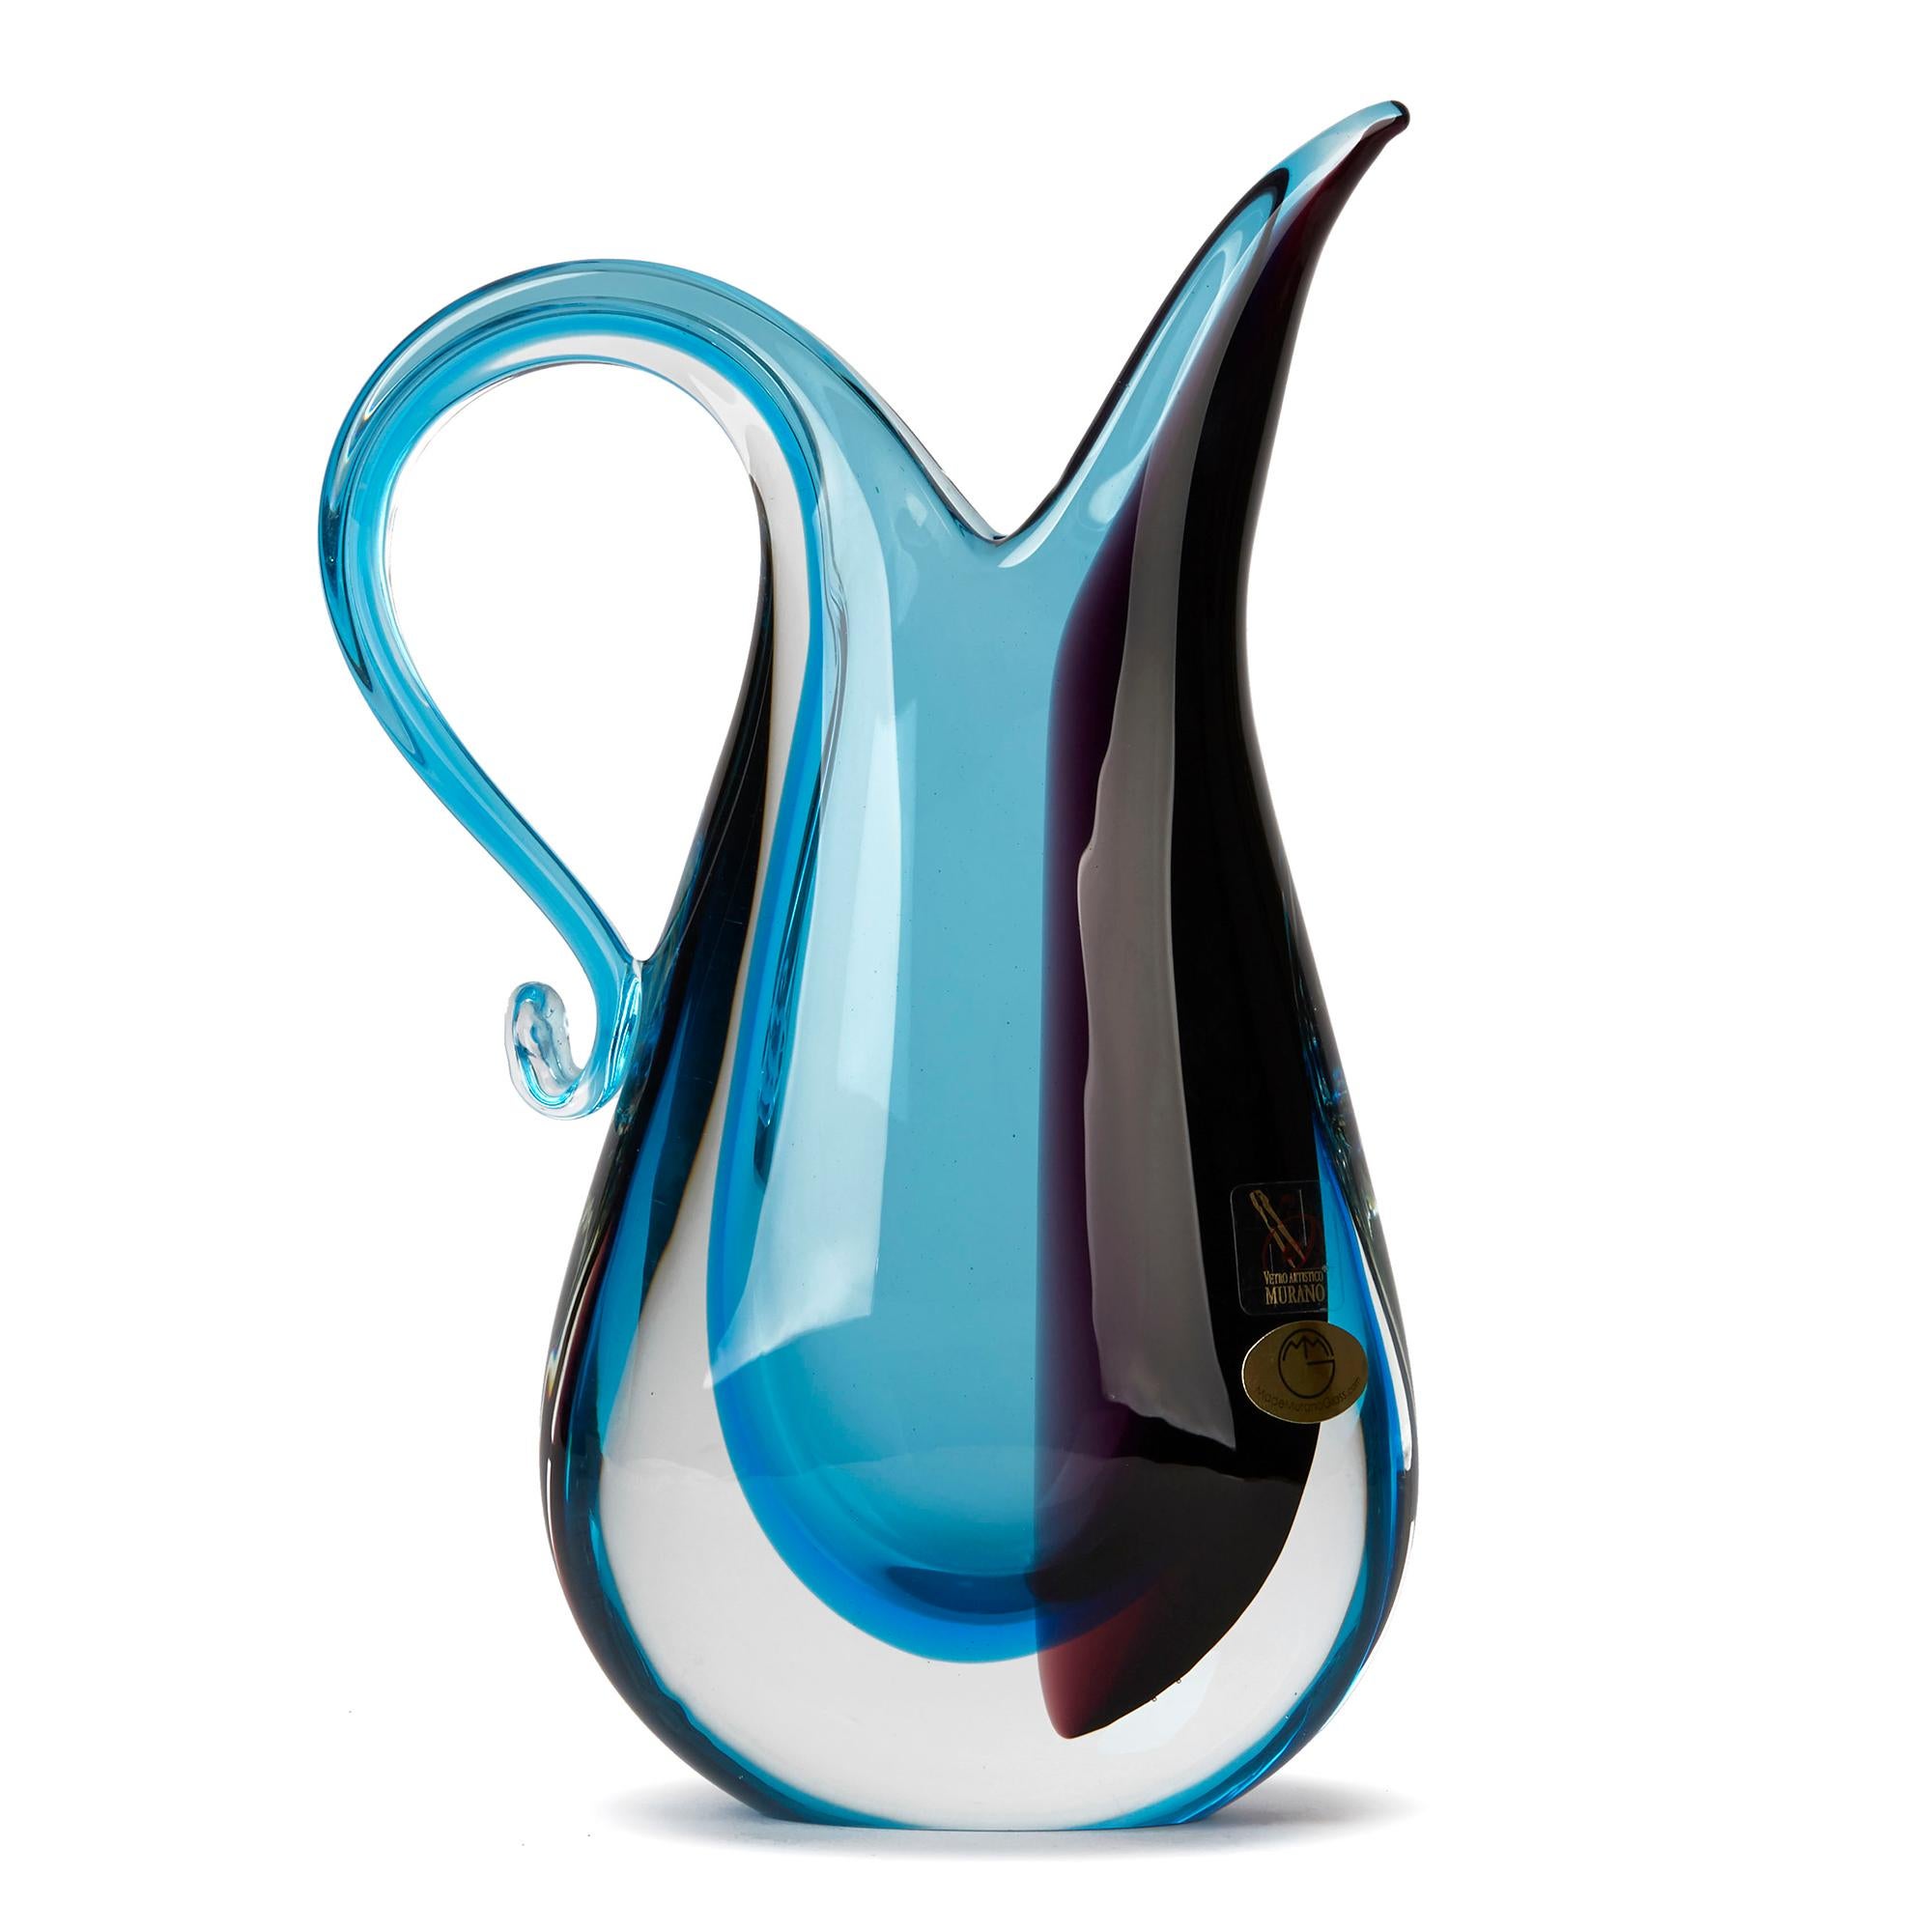 PLEASE NOTE: This piece is currently located in our Amsterdam office, please enquire for delivery times. 

A stunning Italian Murano art glass vase by Michele Onesto. The handmade heavily made vase has a blue sommerso core with a section of